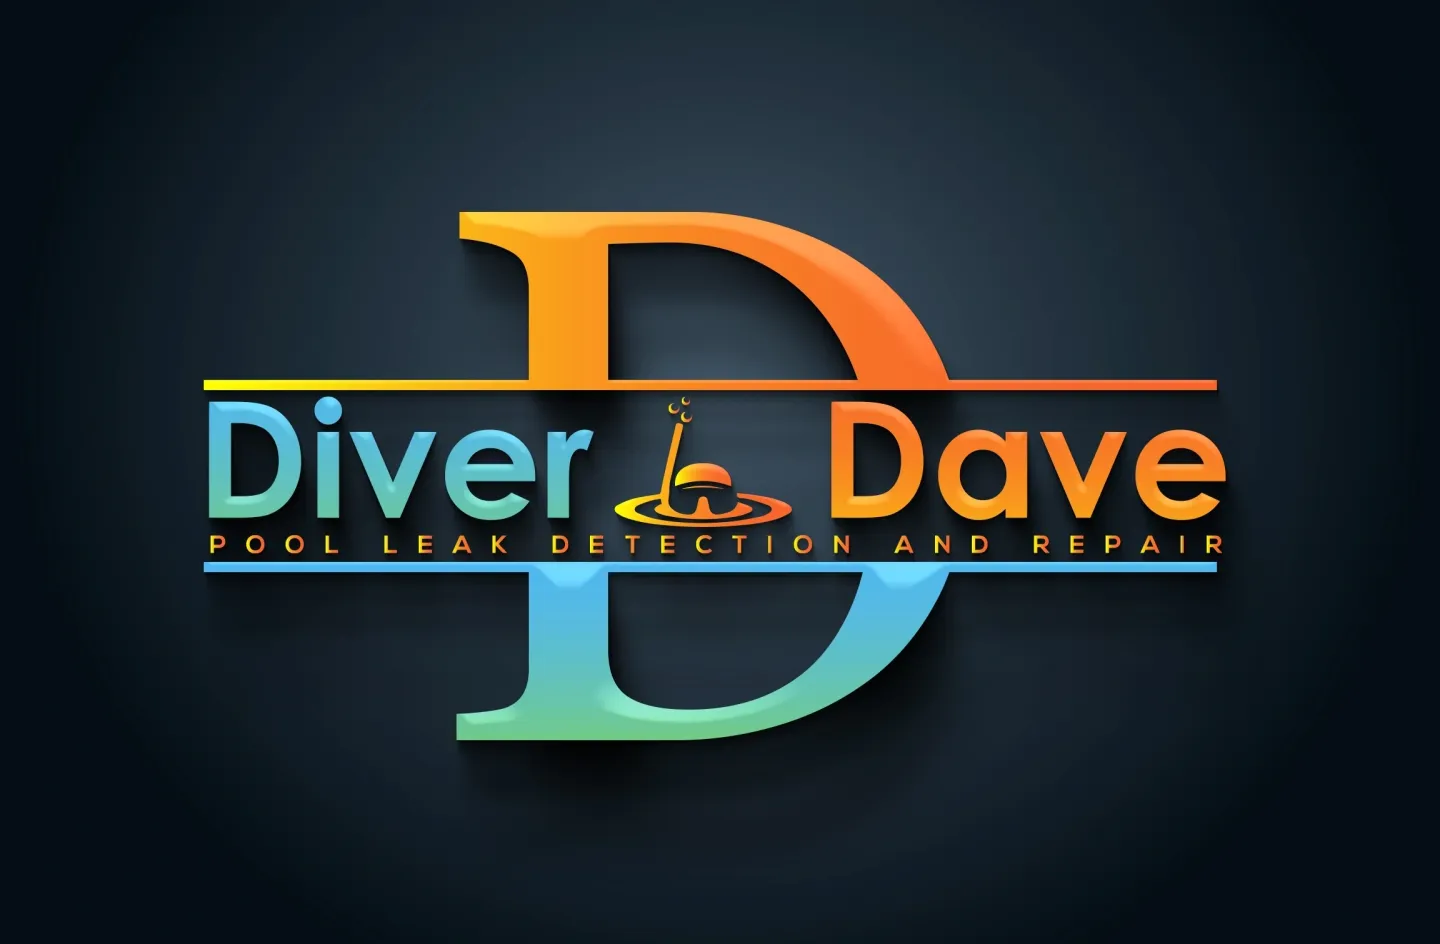 Diver Dave